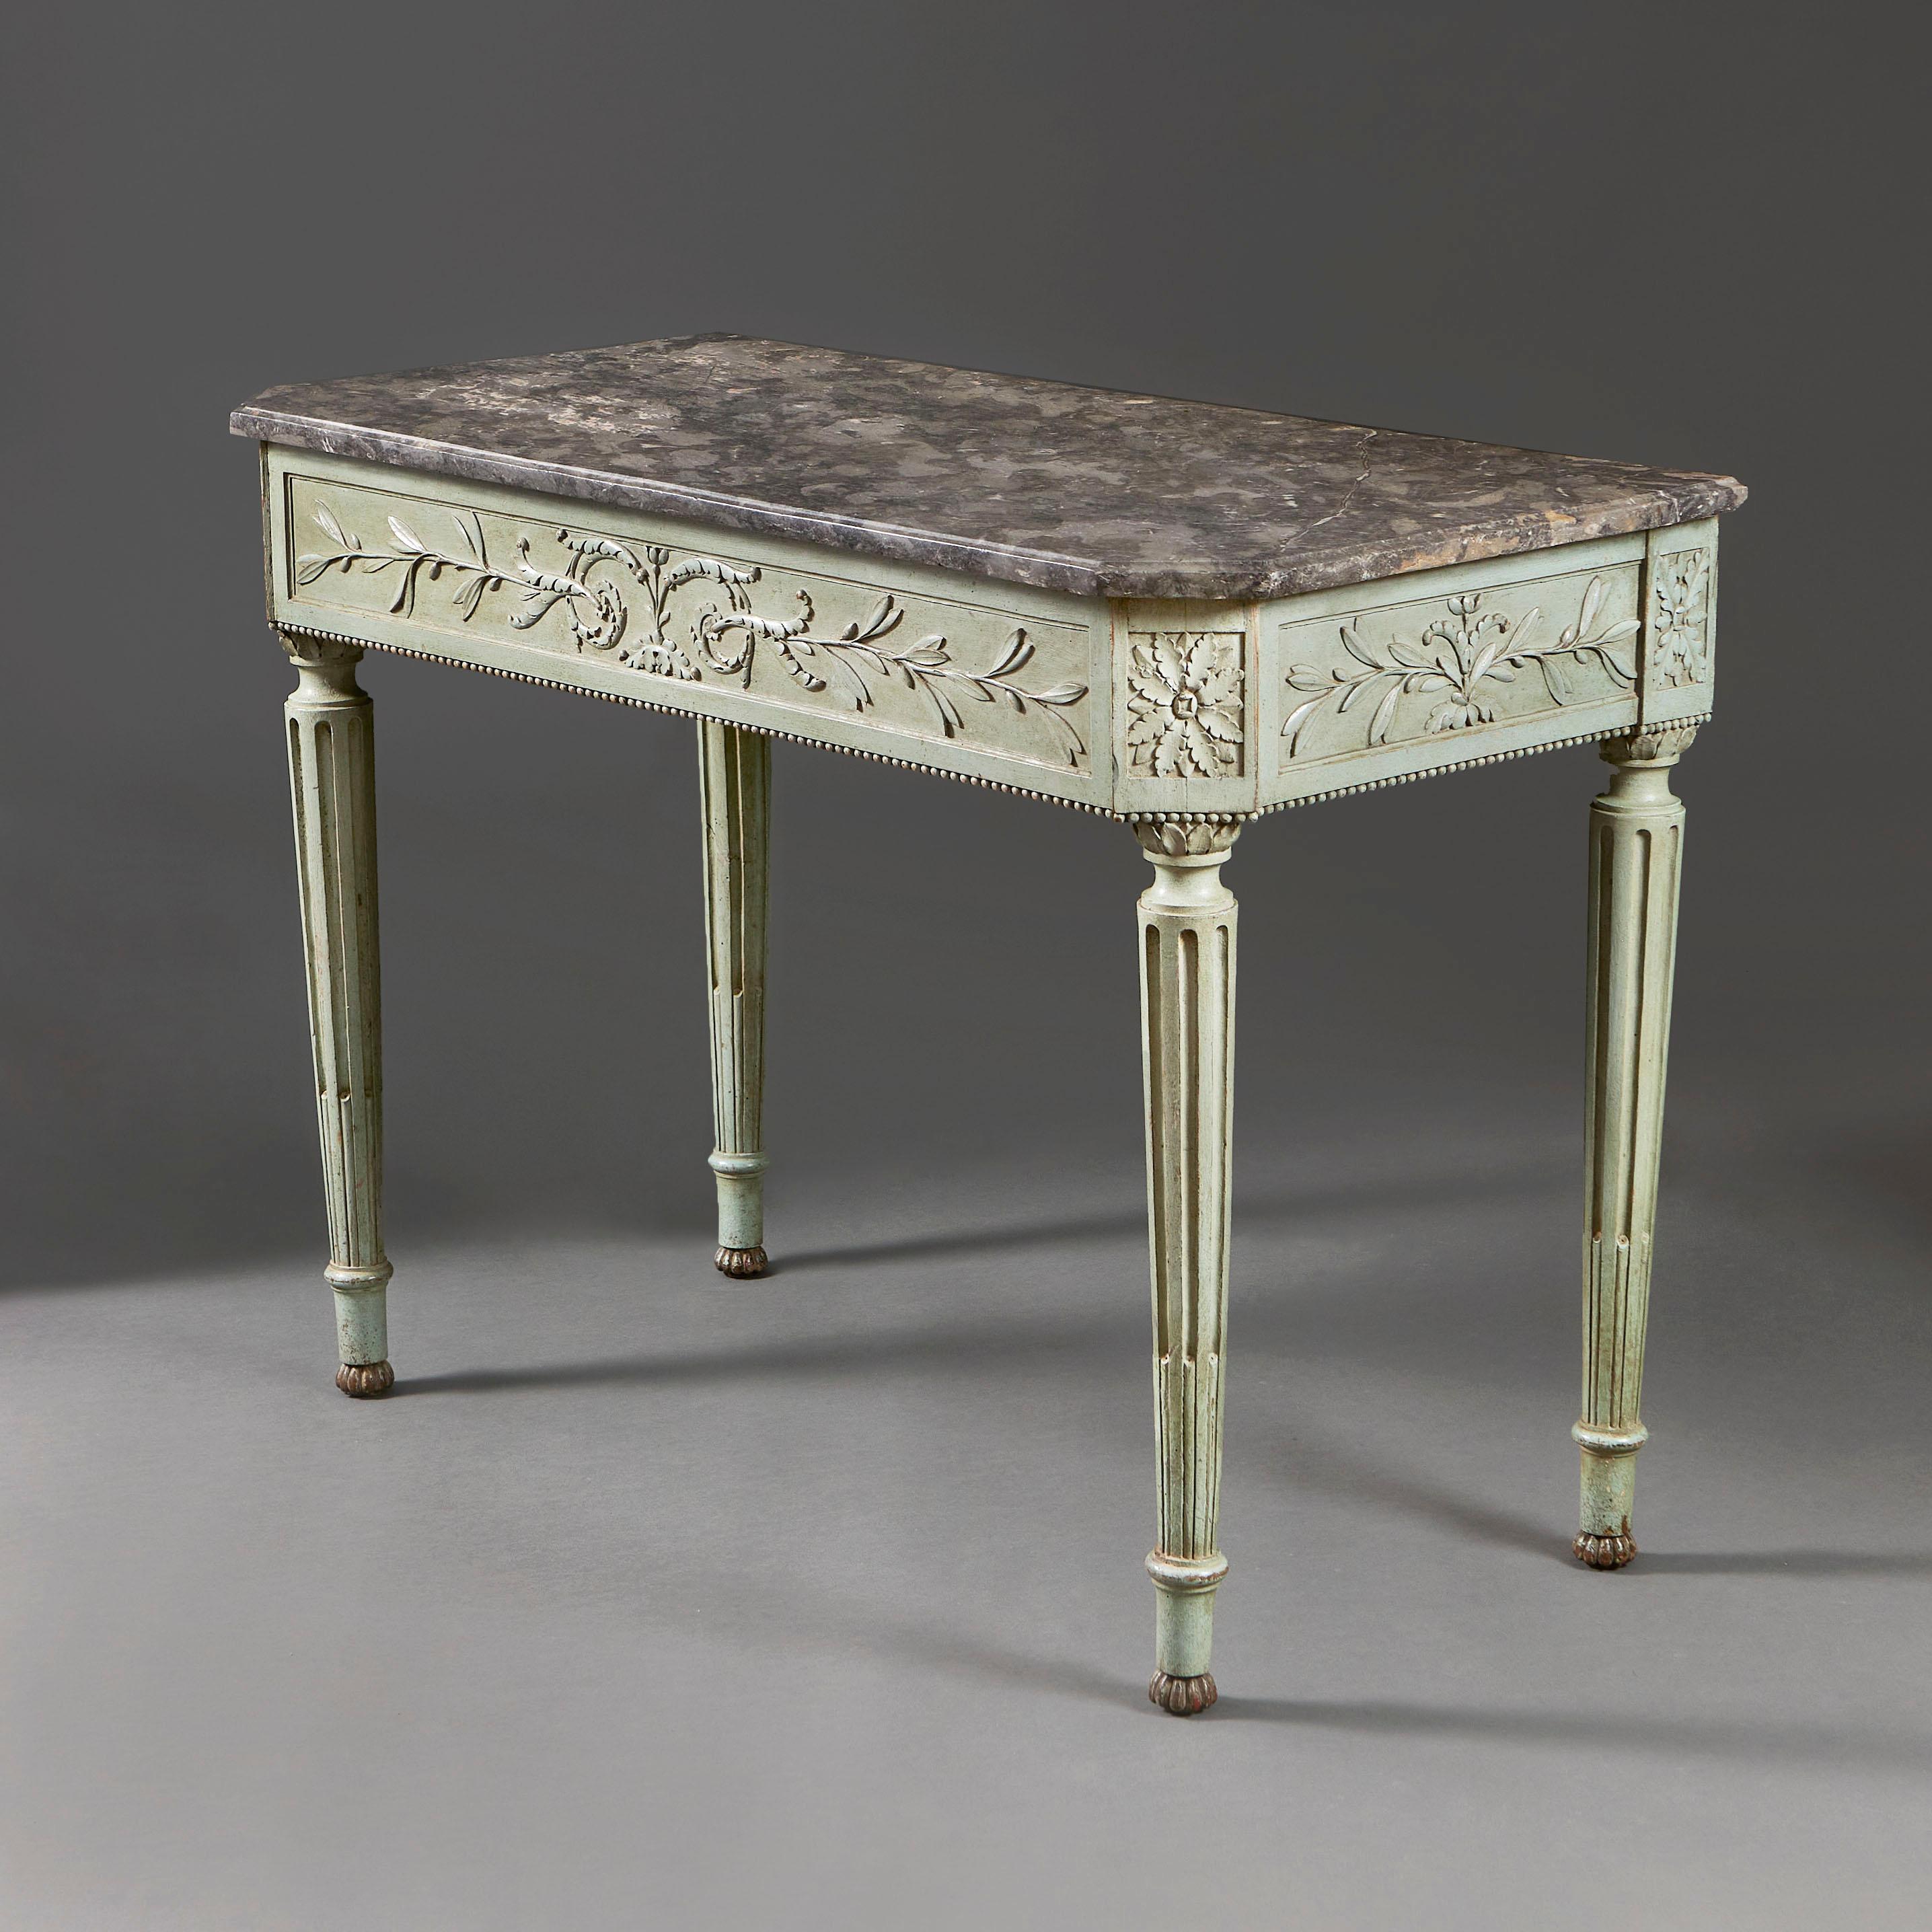 A fine late eighteenth century painted console table, the frieze decorated with olive branches, the central cartouche with acanthus and paterae on the canted corners, retaining the original grey veined marble top, supported on fluted tapering legs.